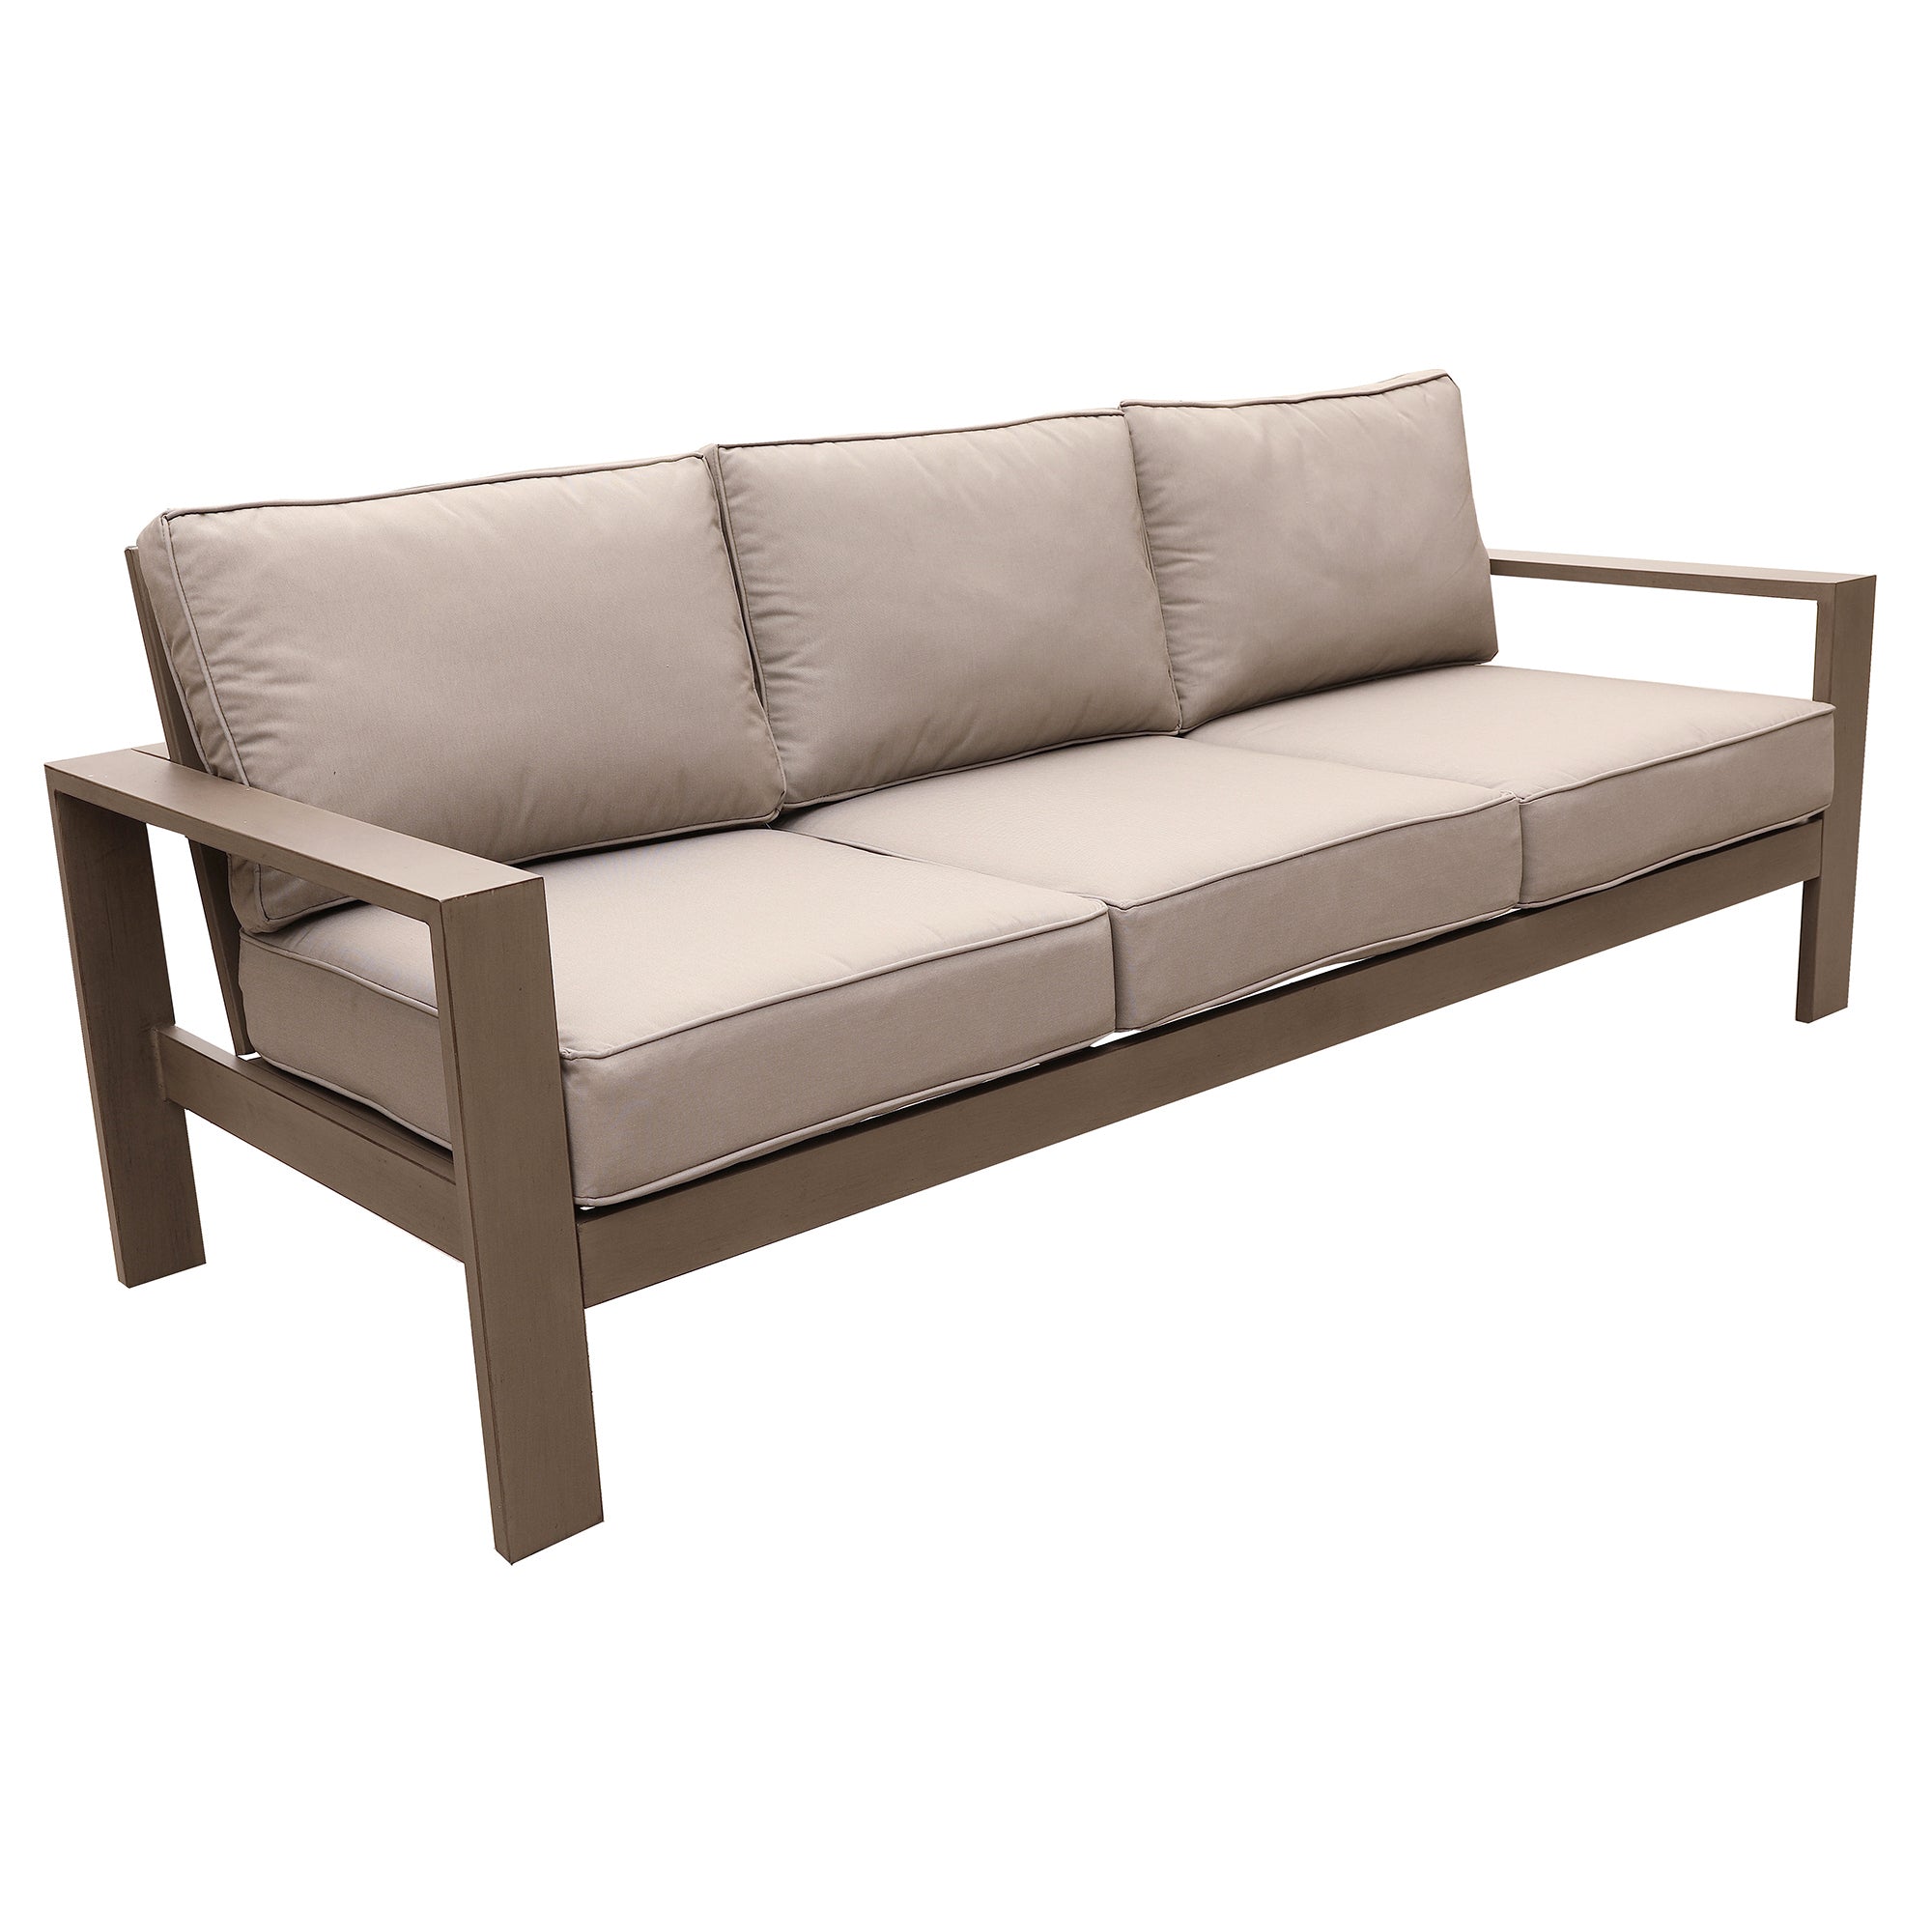 4 Piece Sofa Seating Group with Firepit, Wood Grained pewter-polyester-aluminum